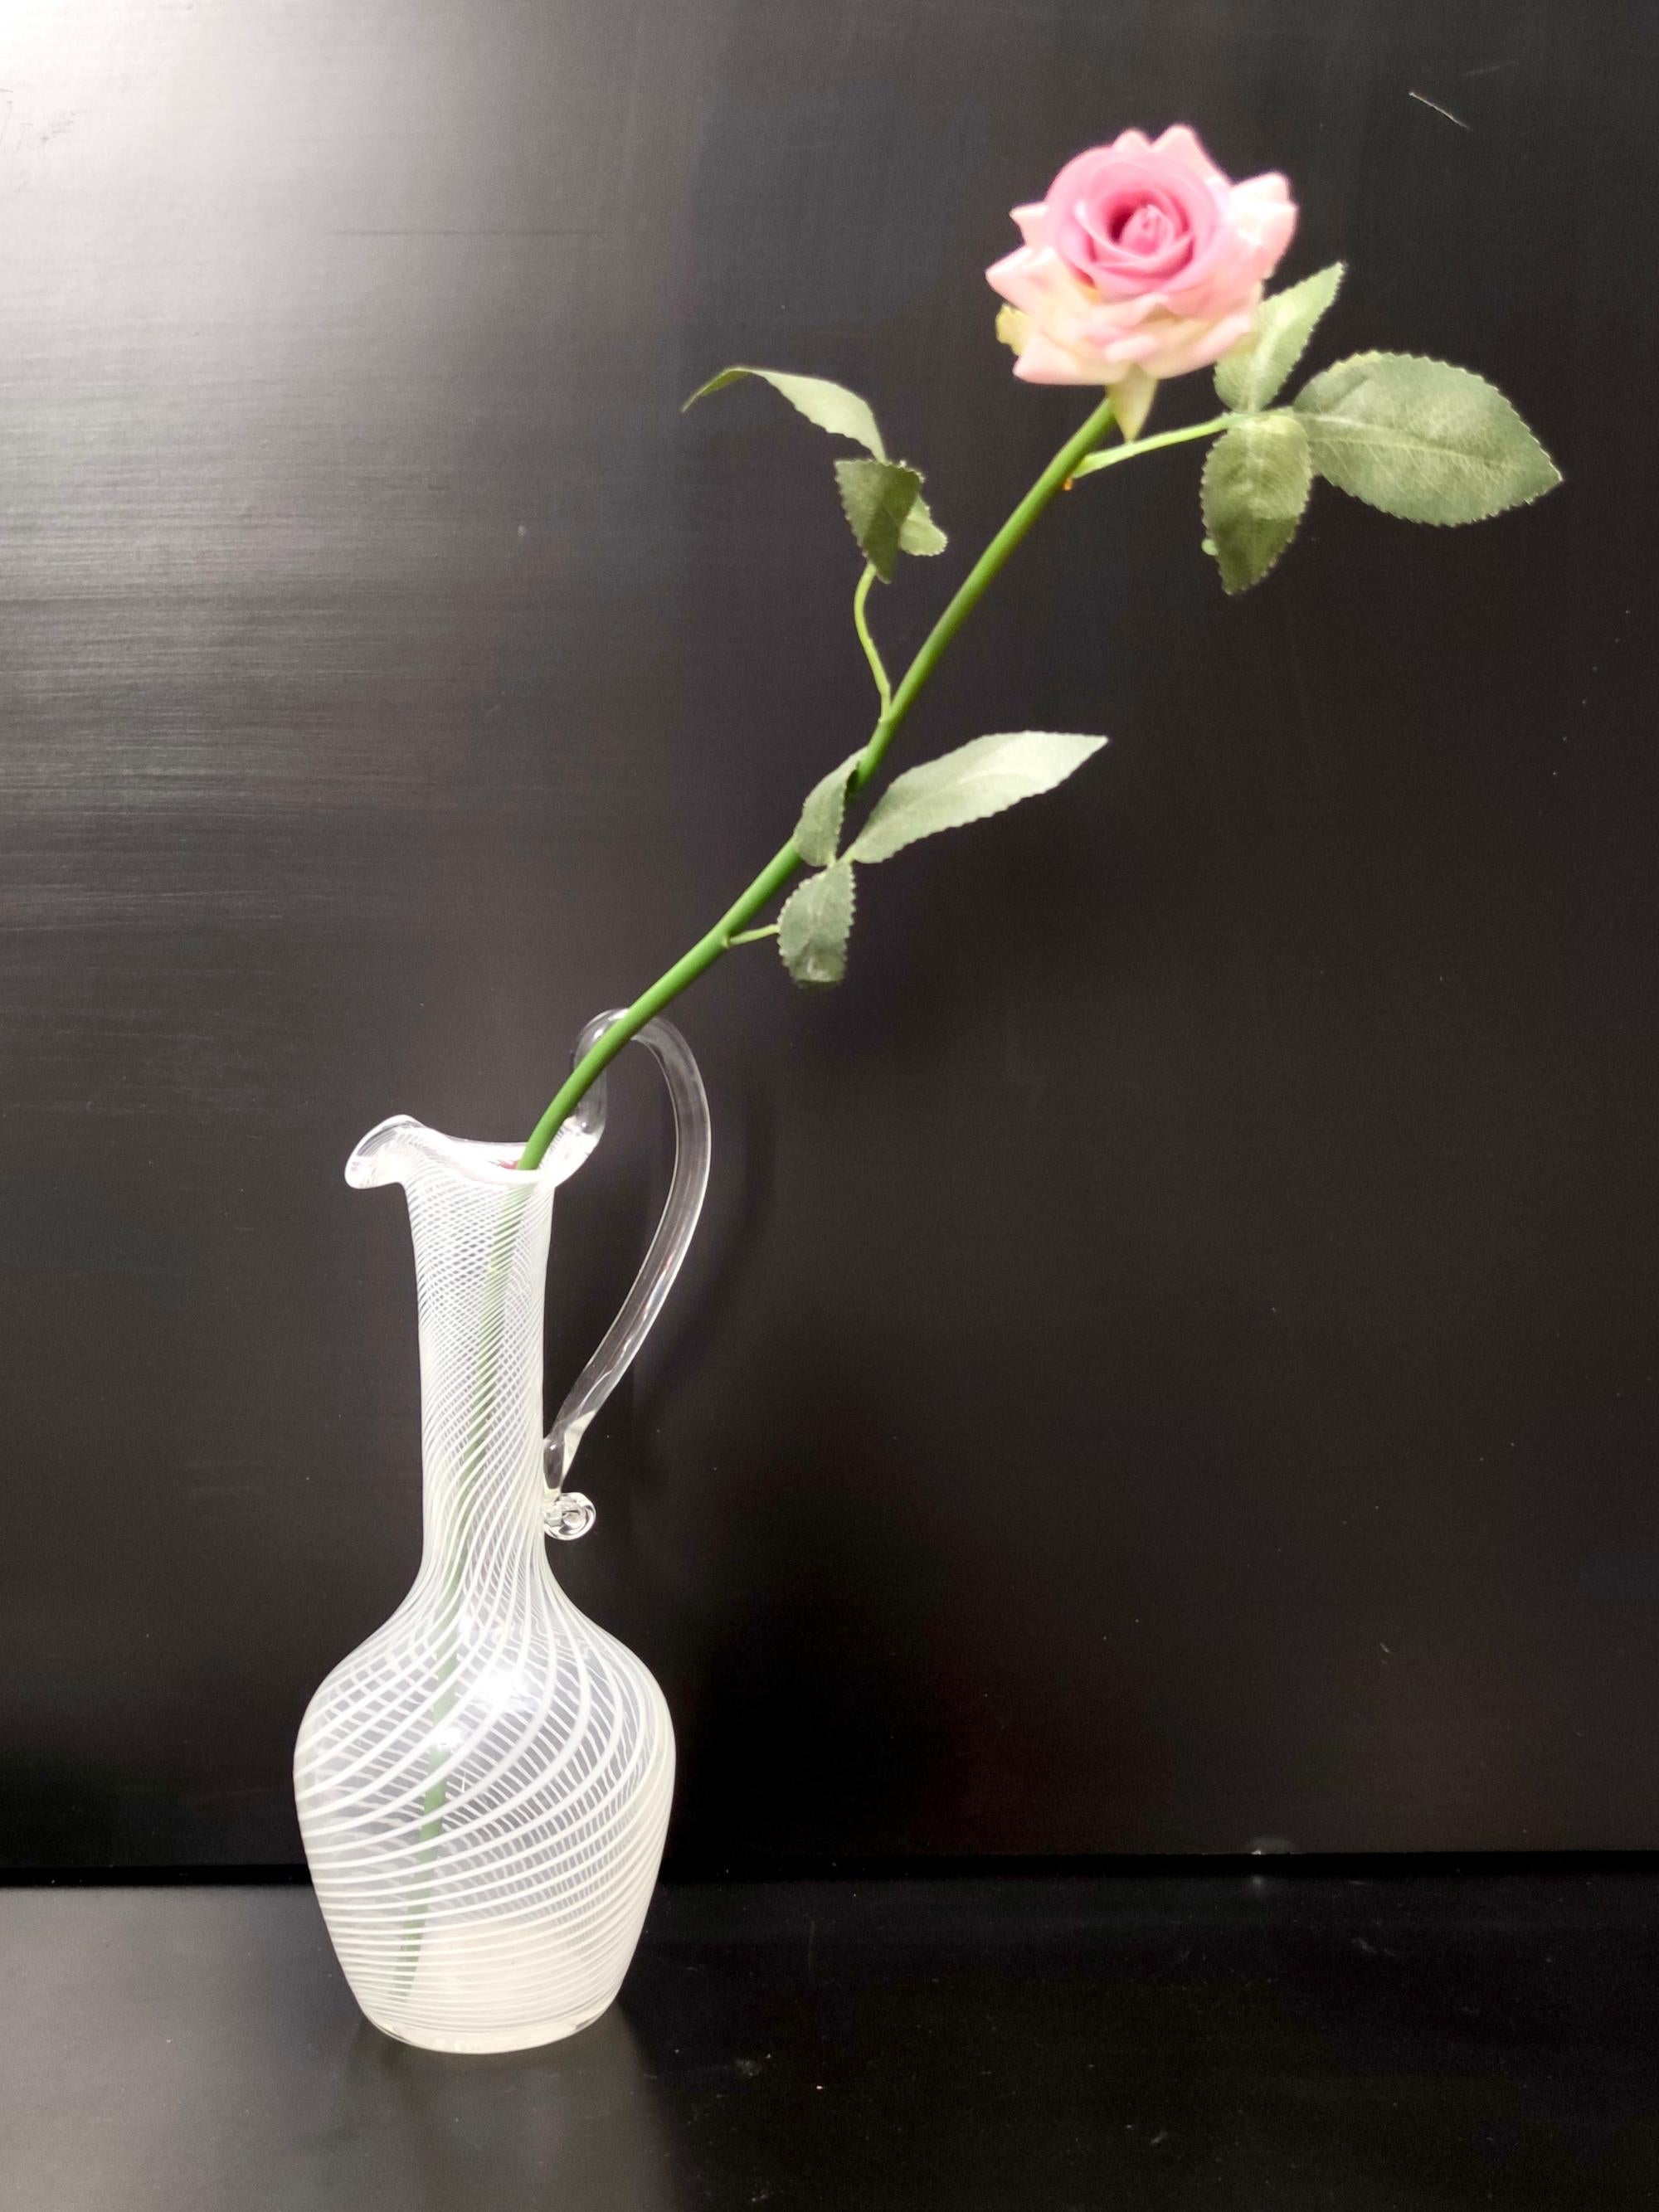 Made in Italy, 1950s. 
This pitcher vase is made in Murano glass and features transparent and white canes. 
It is a vintage item, therefore it might show slight traces of use, but it can be considered as in excellent original condition and ready to